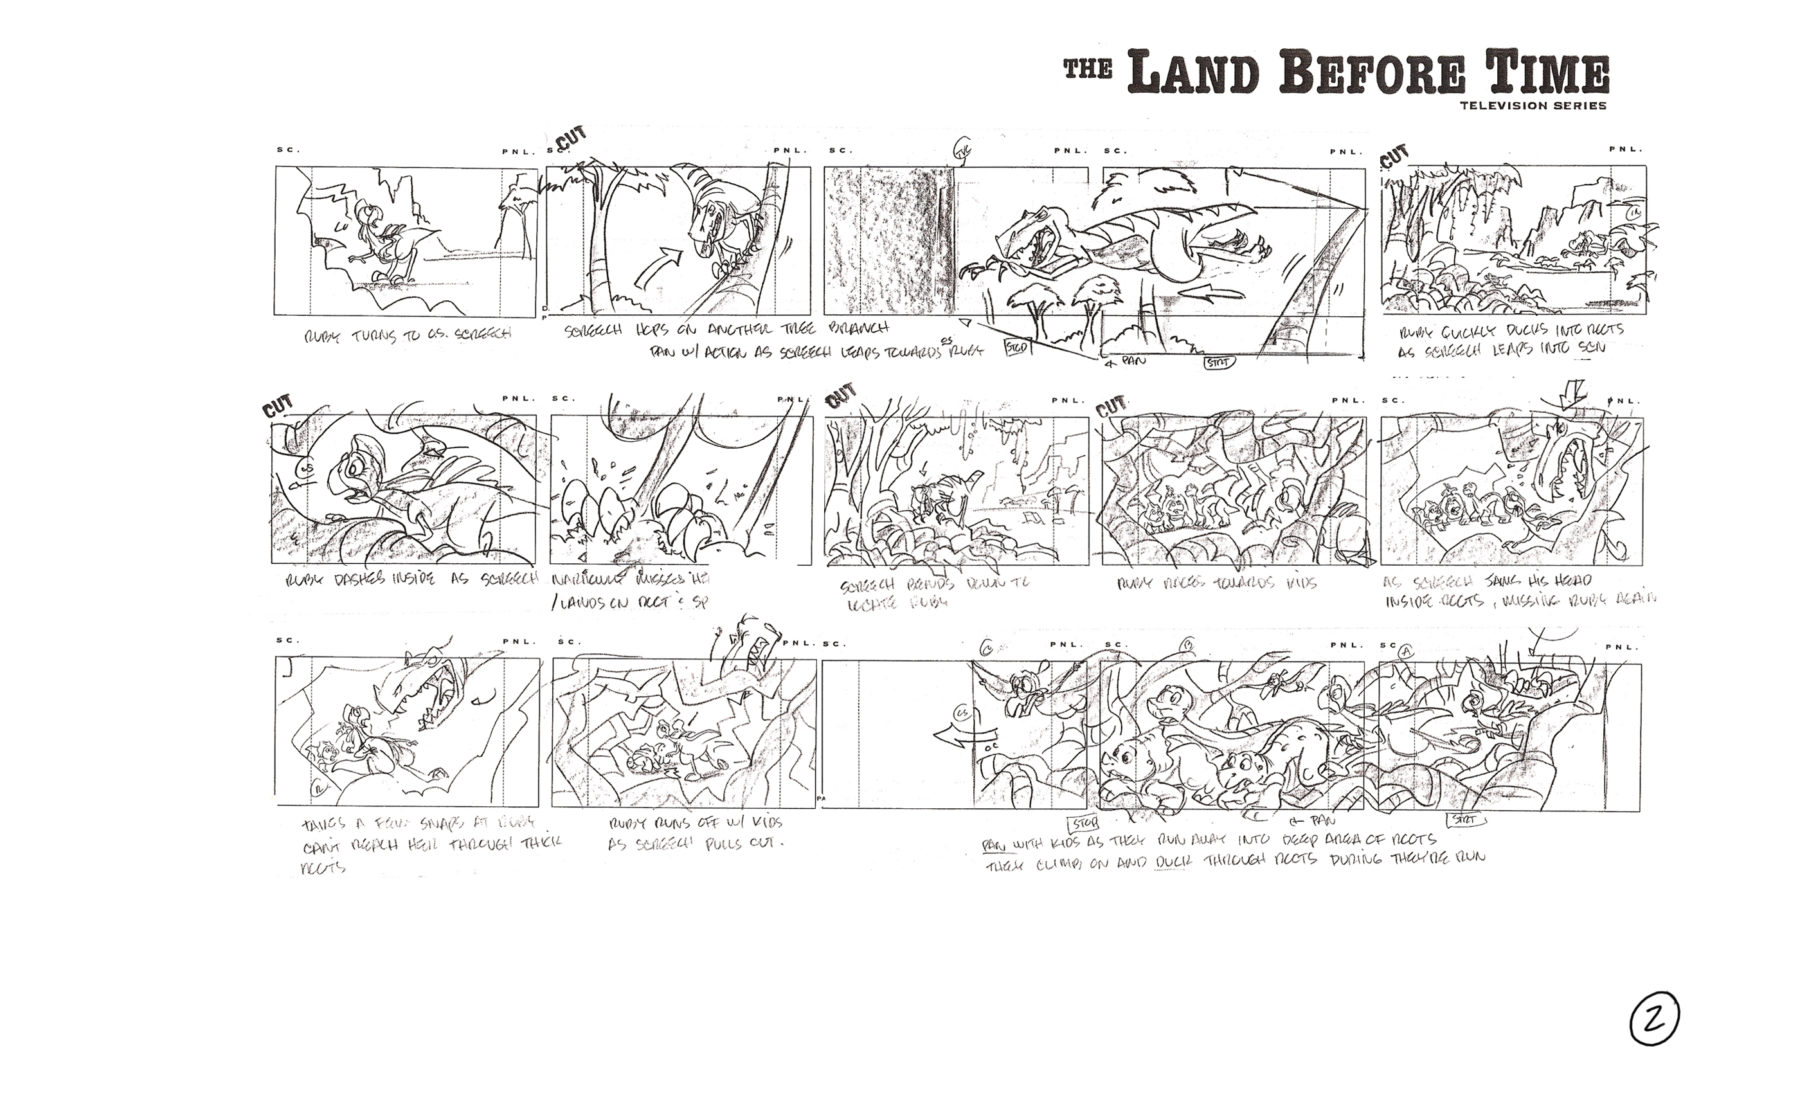 The Land Before Time Animated Series, Storyboards by Bert Ring